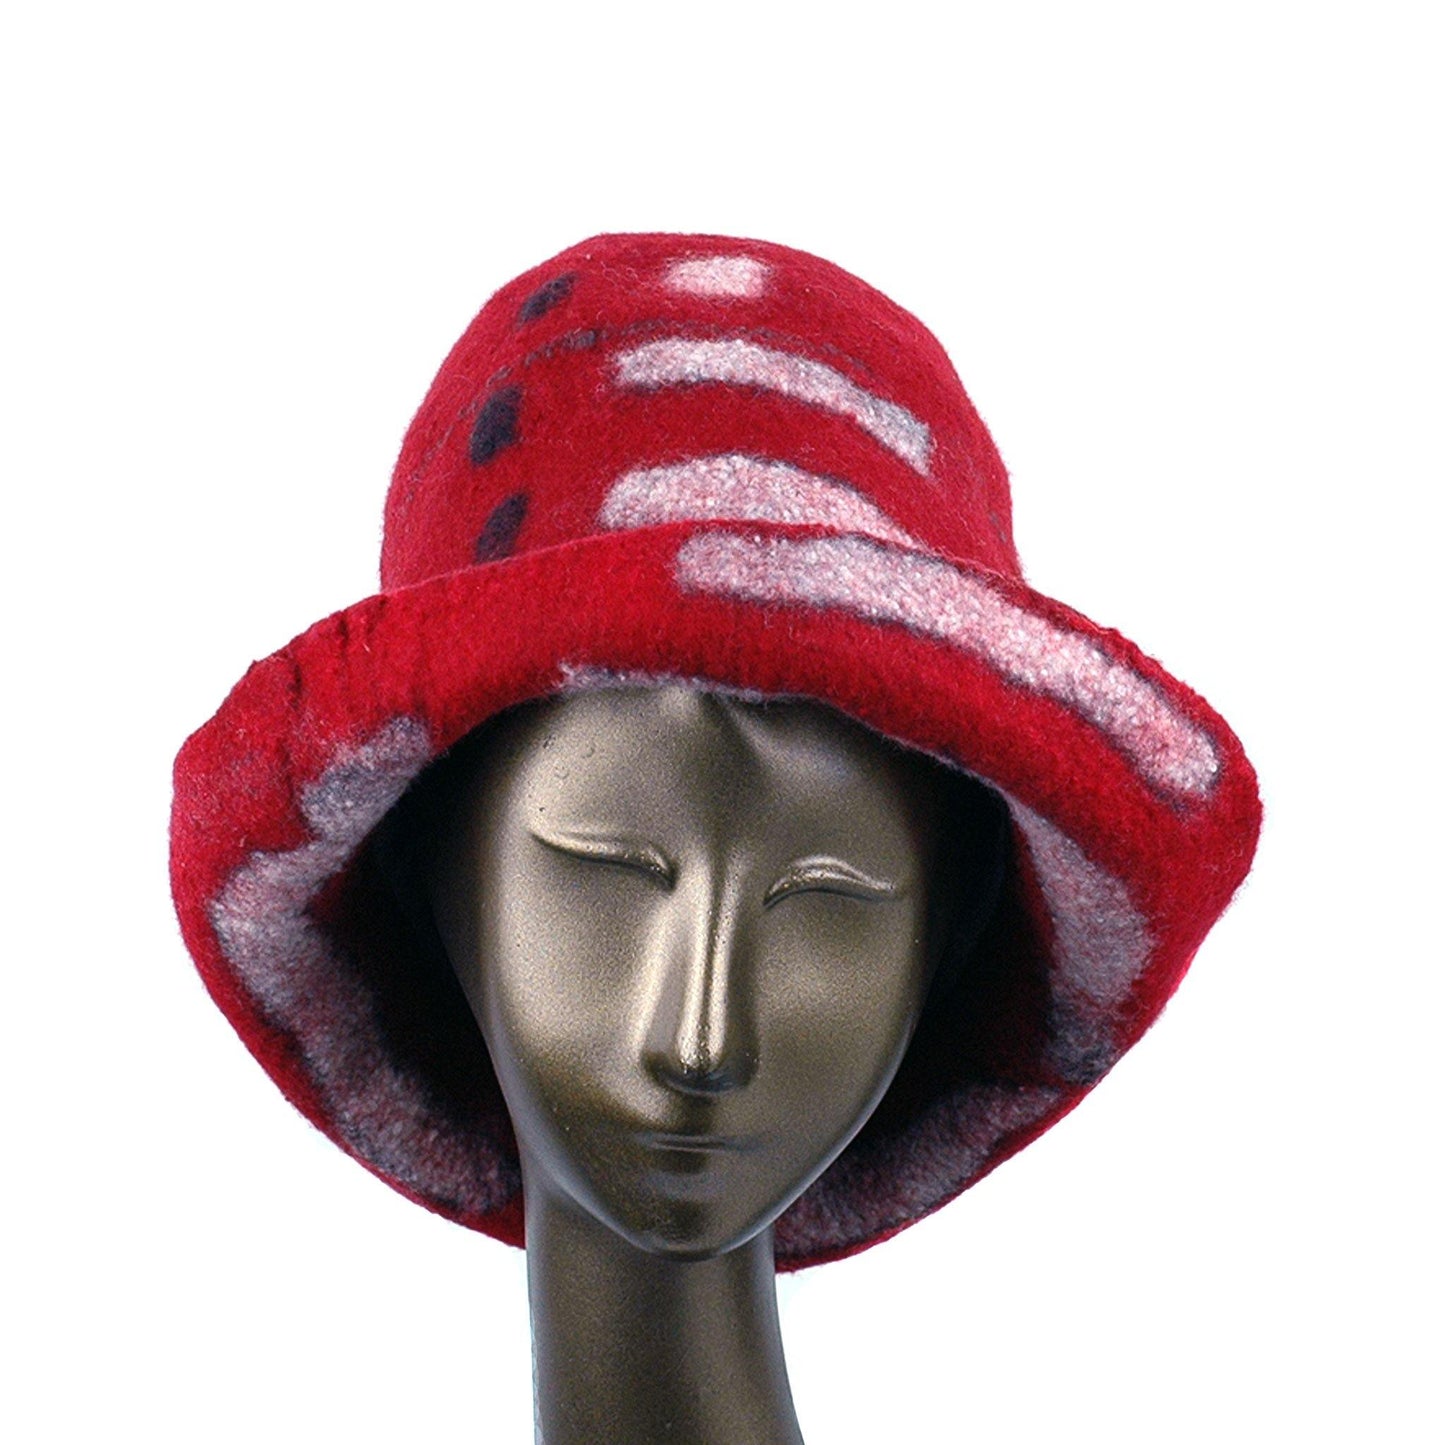 Tall Red and Black Brimmed Hat with Geometric Shapes